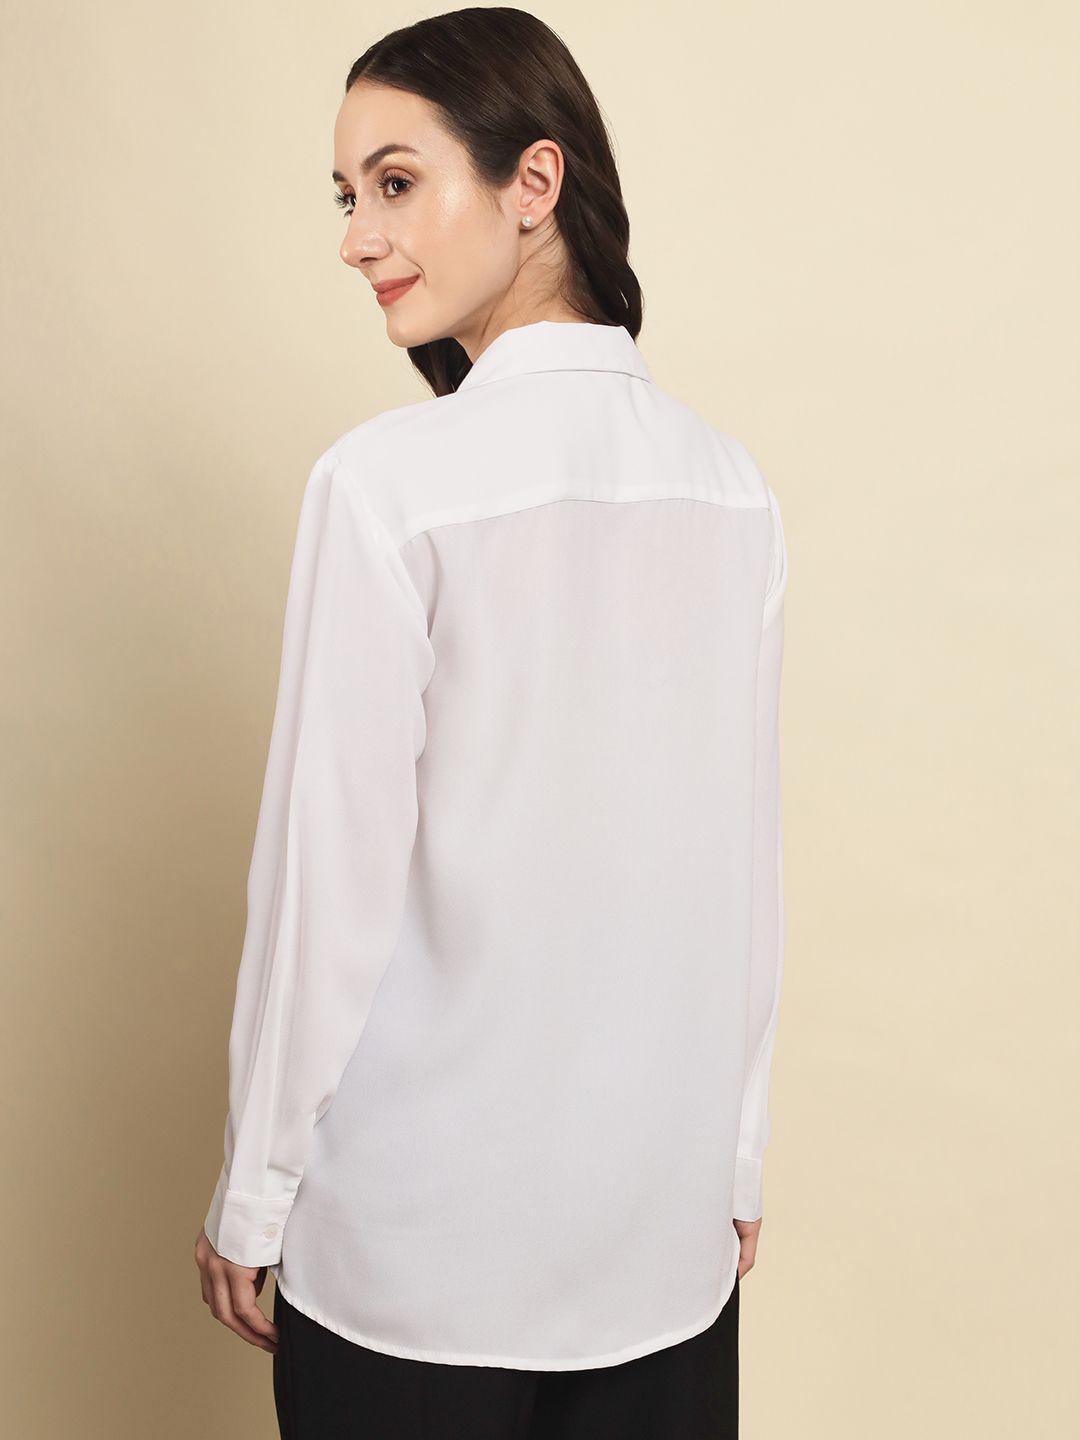 Trend Arrest Women's Polyester Solid Classic White Oversized Shirt